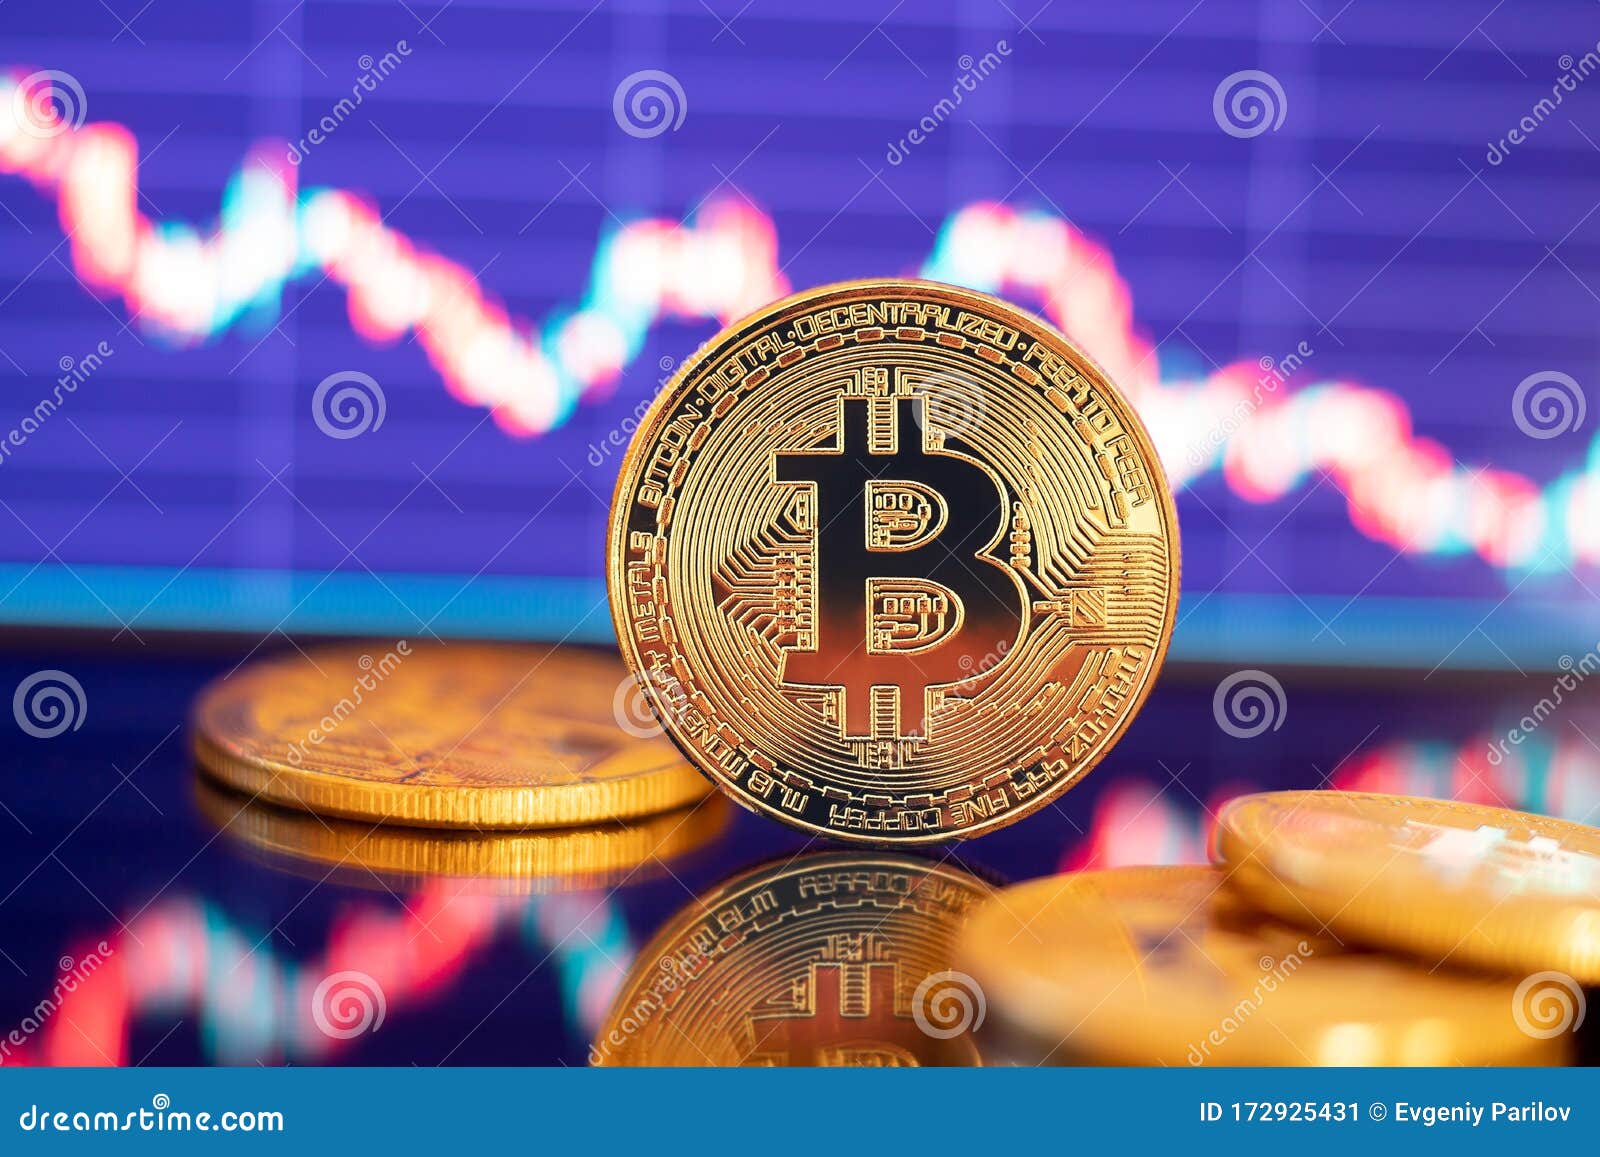 Gold Bitcoin Crypto Currency On Background Of Red Candles ...